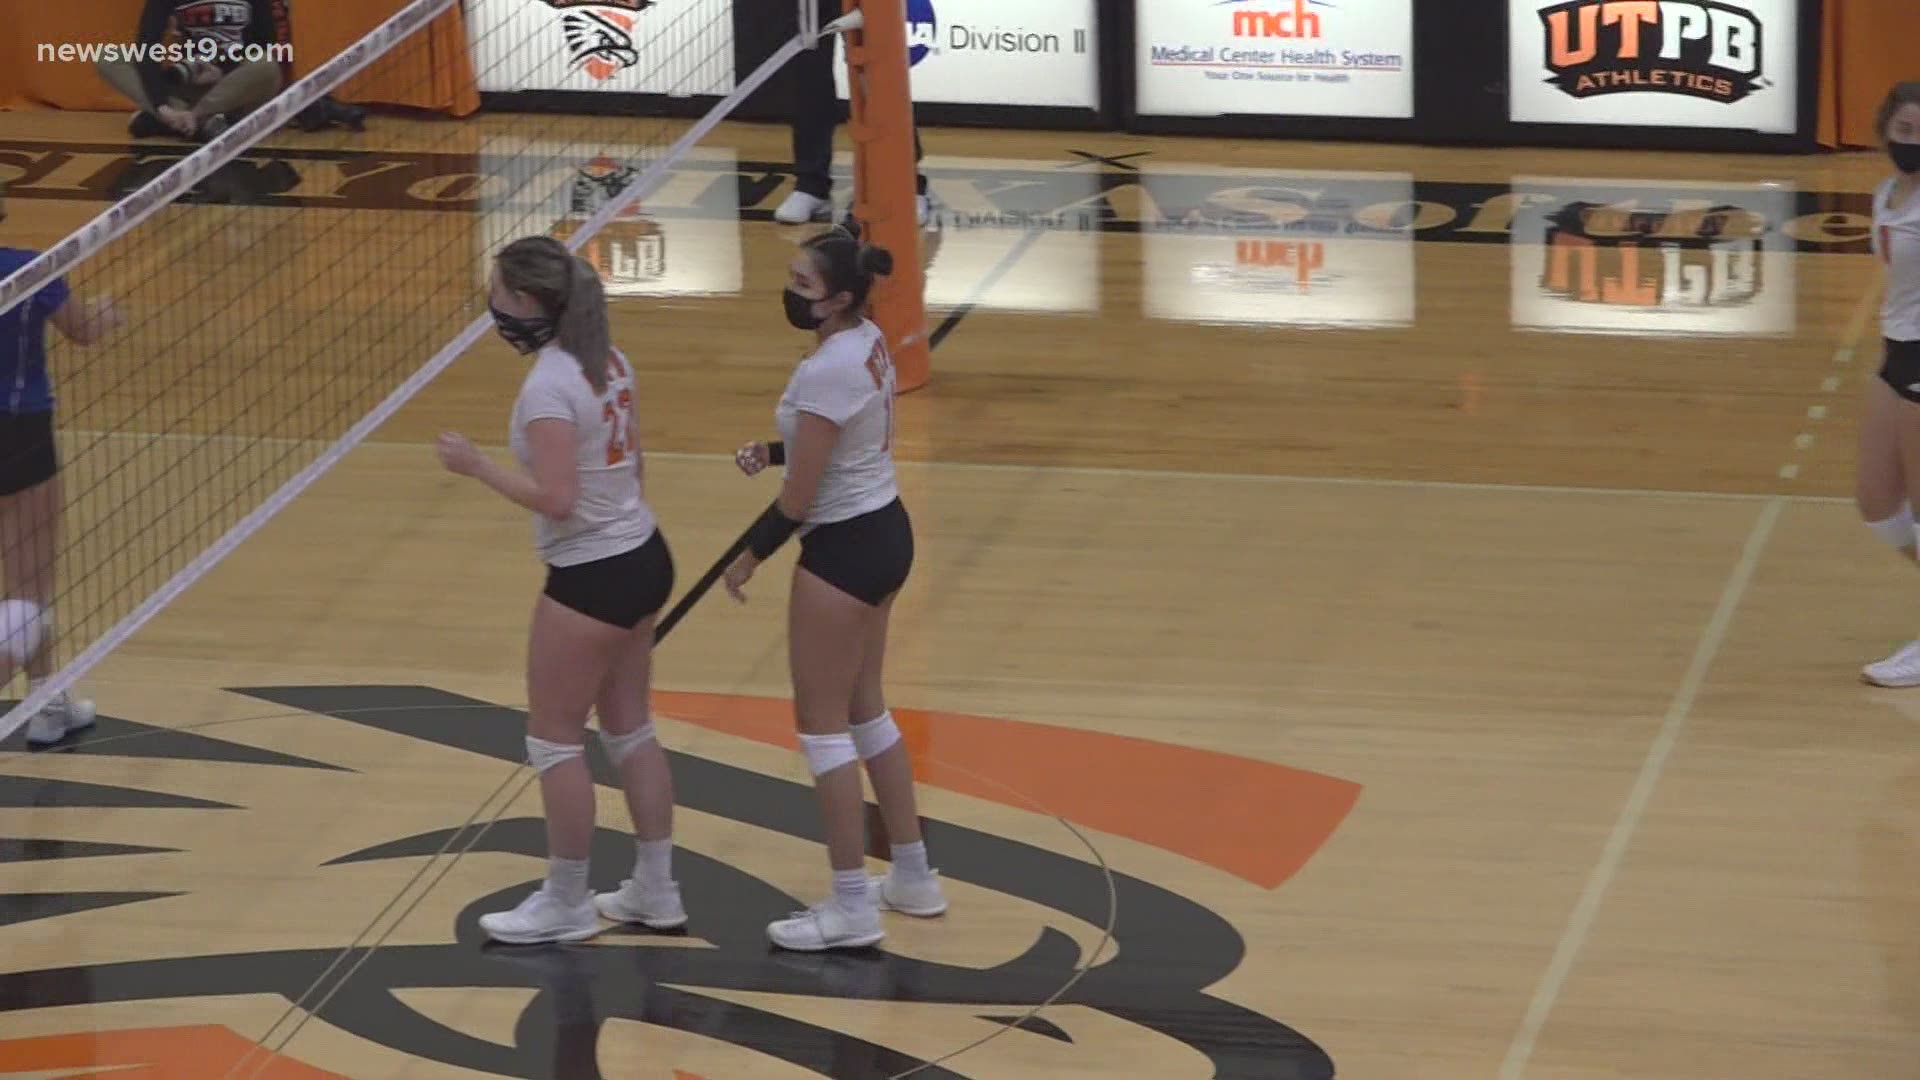 UTPB looked to hold on to their ranking against a tough opponent.